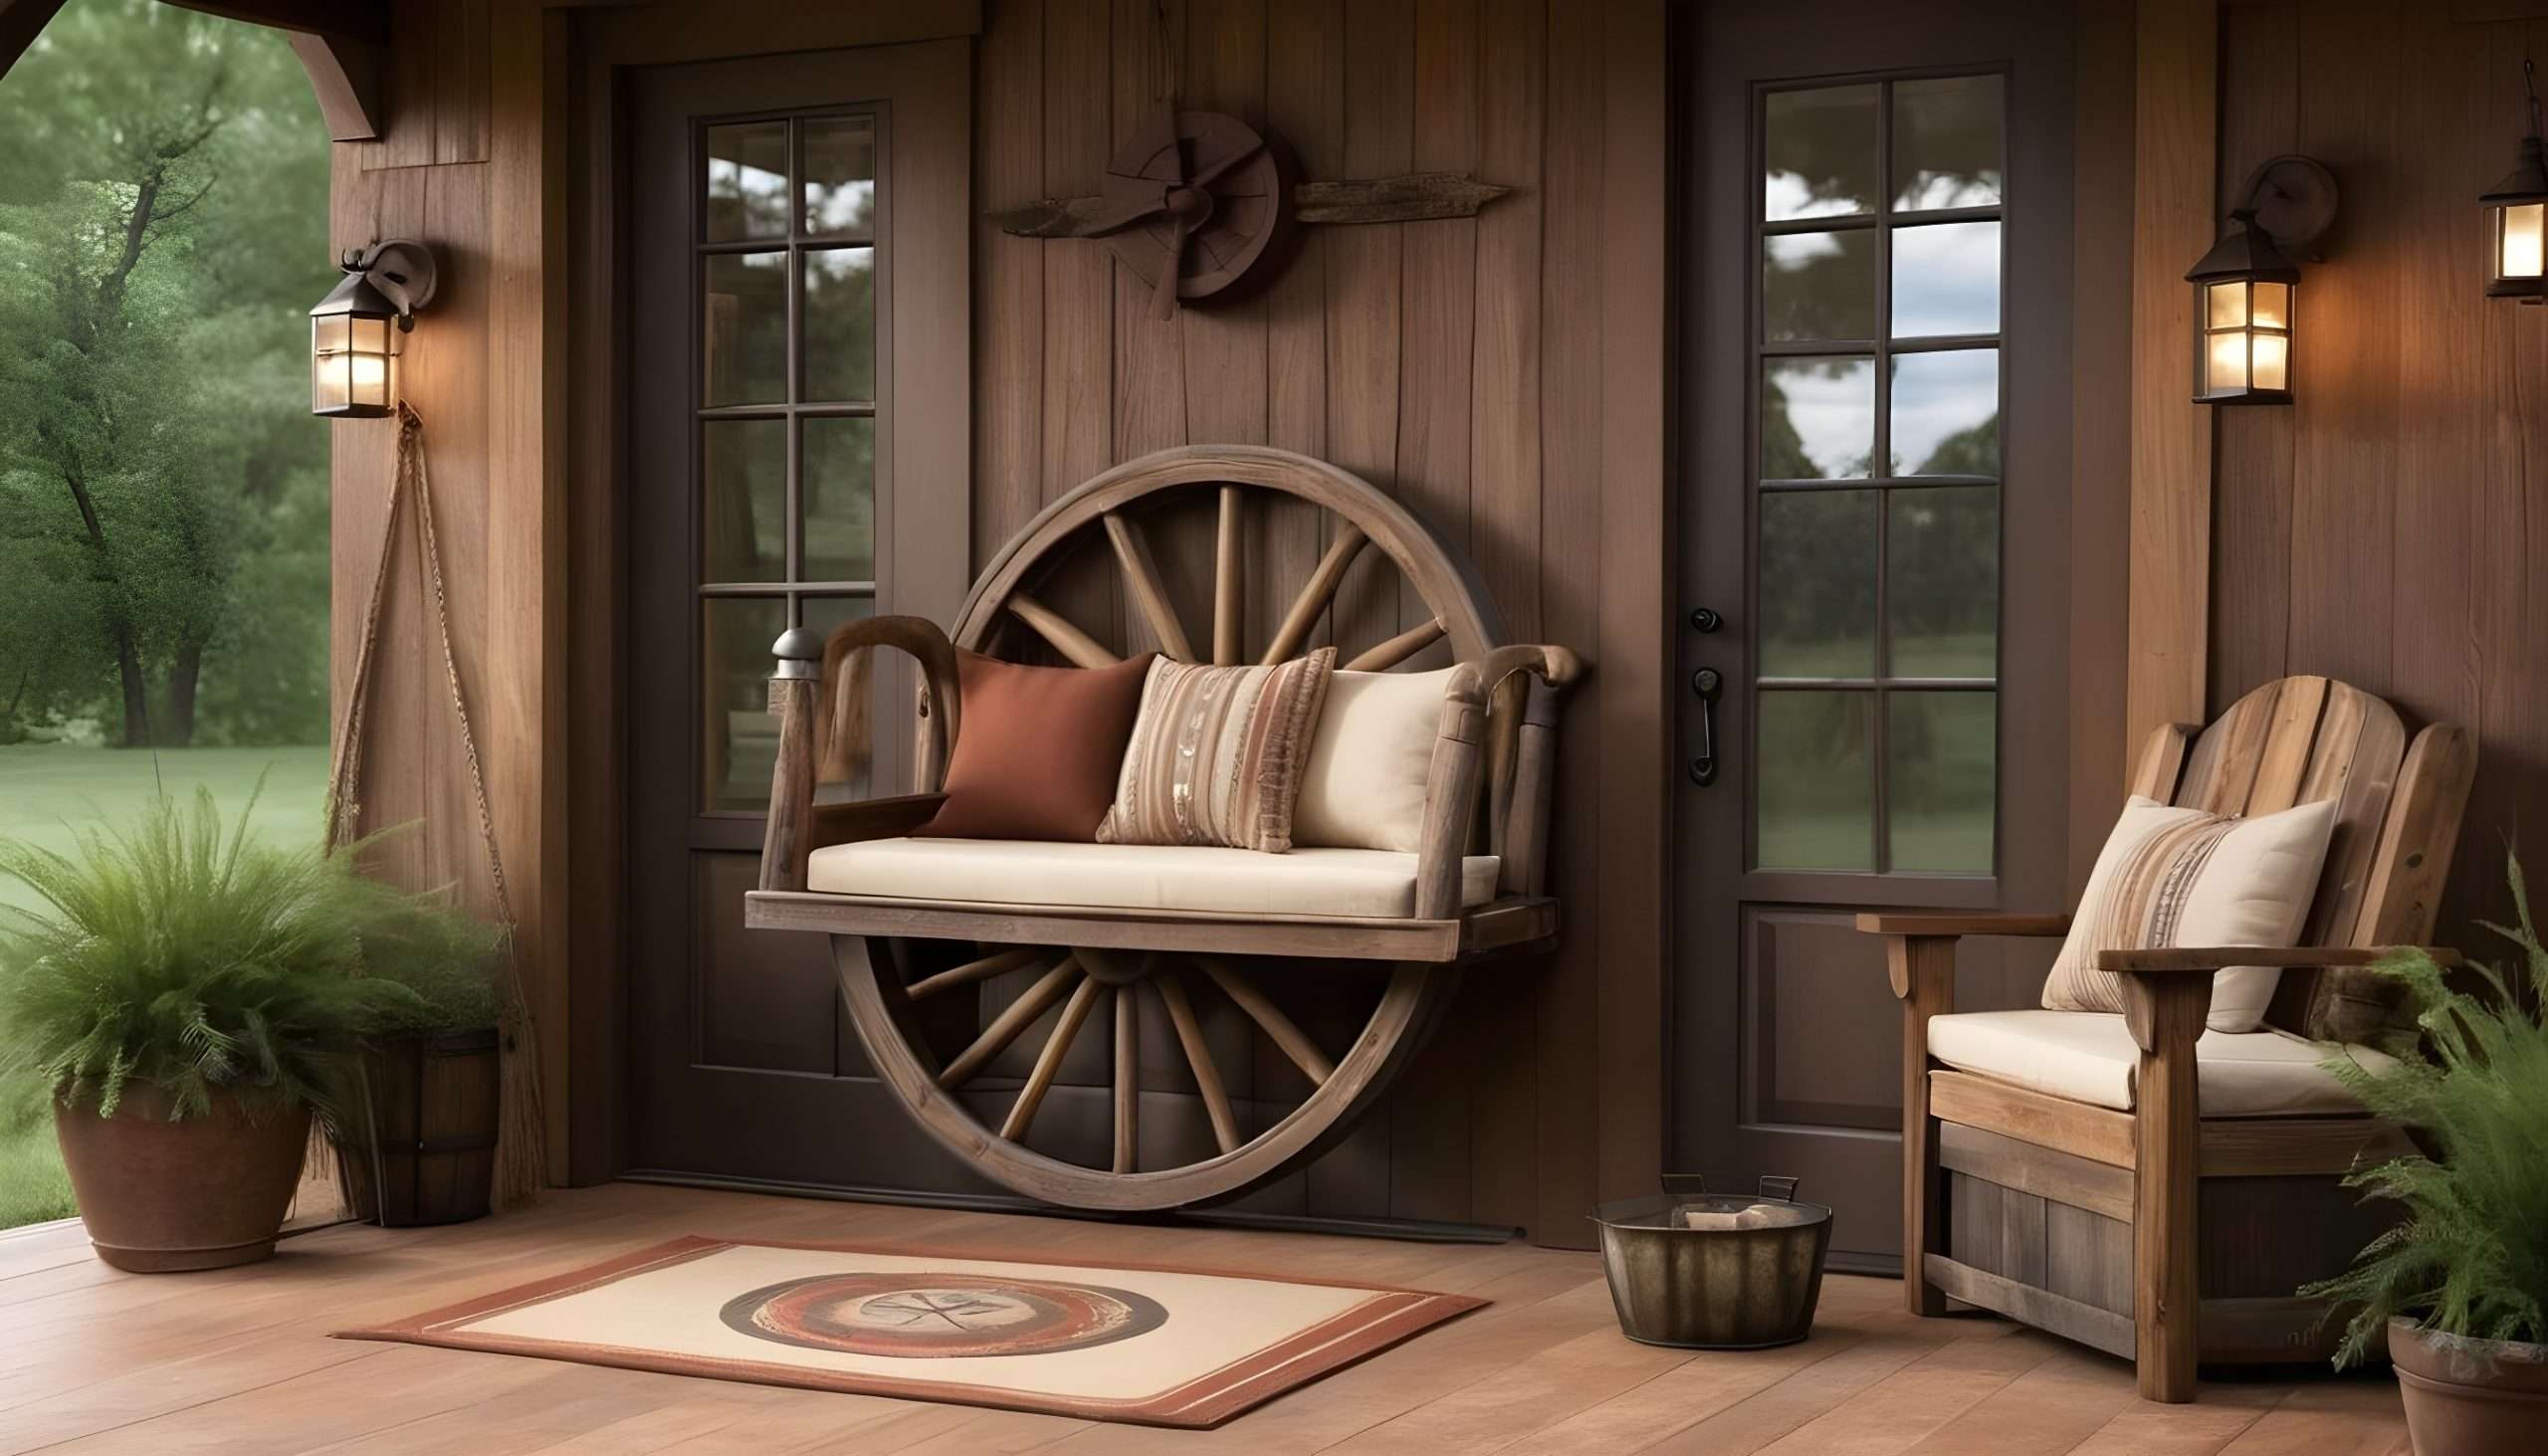 Rustic Elegance with a Hanging Lantern and Wagon Wheel Bench 